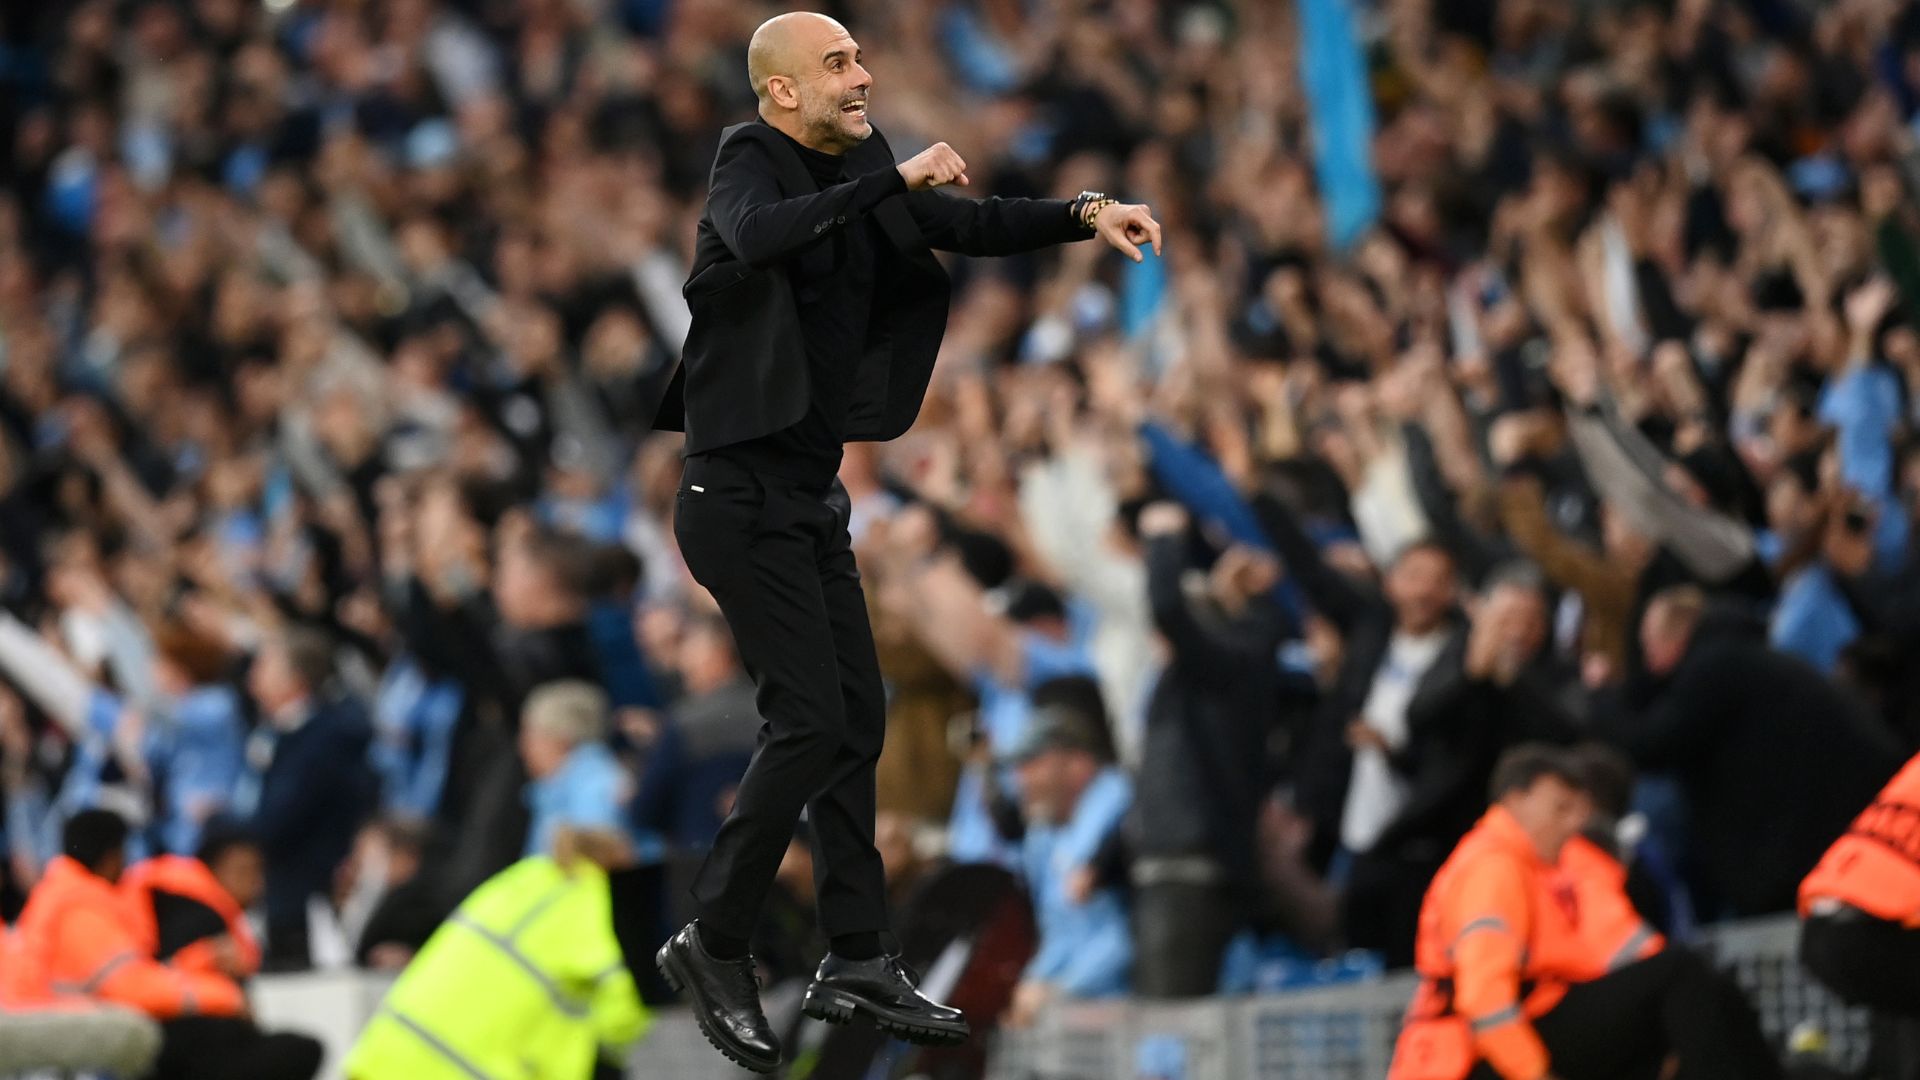 Guardiola celebrating one of the goals scored by Bernardo Silva, against Real Madrid (Credit: Getty Images)